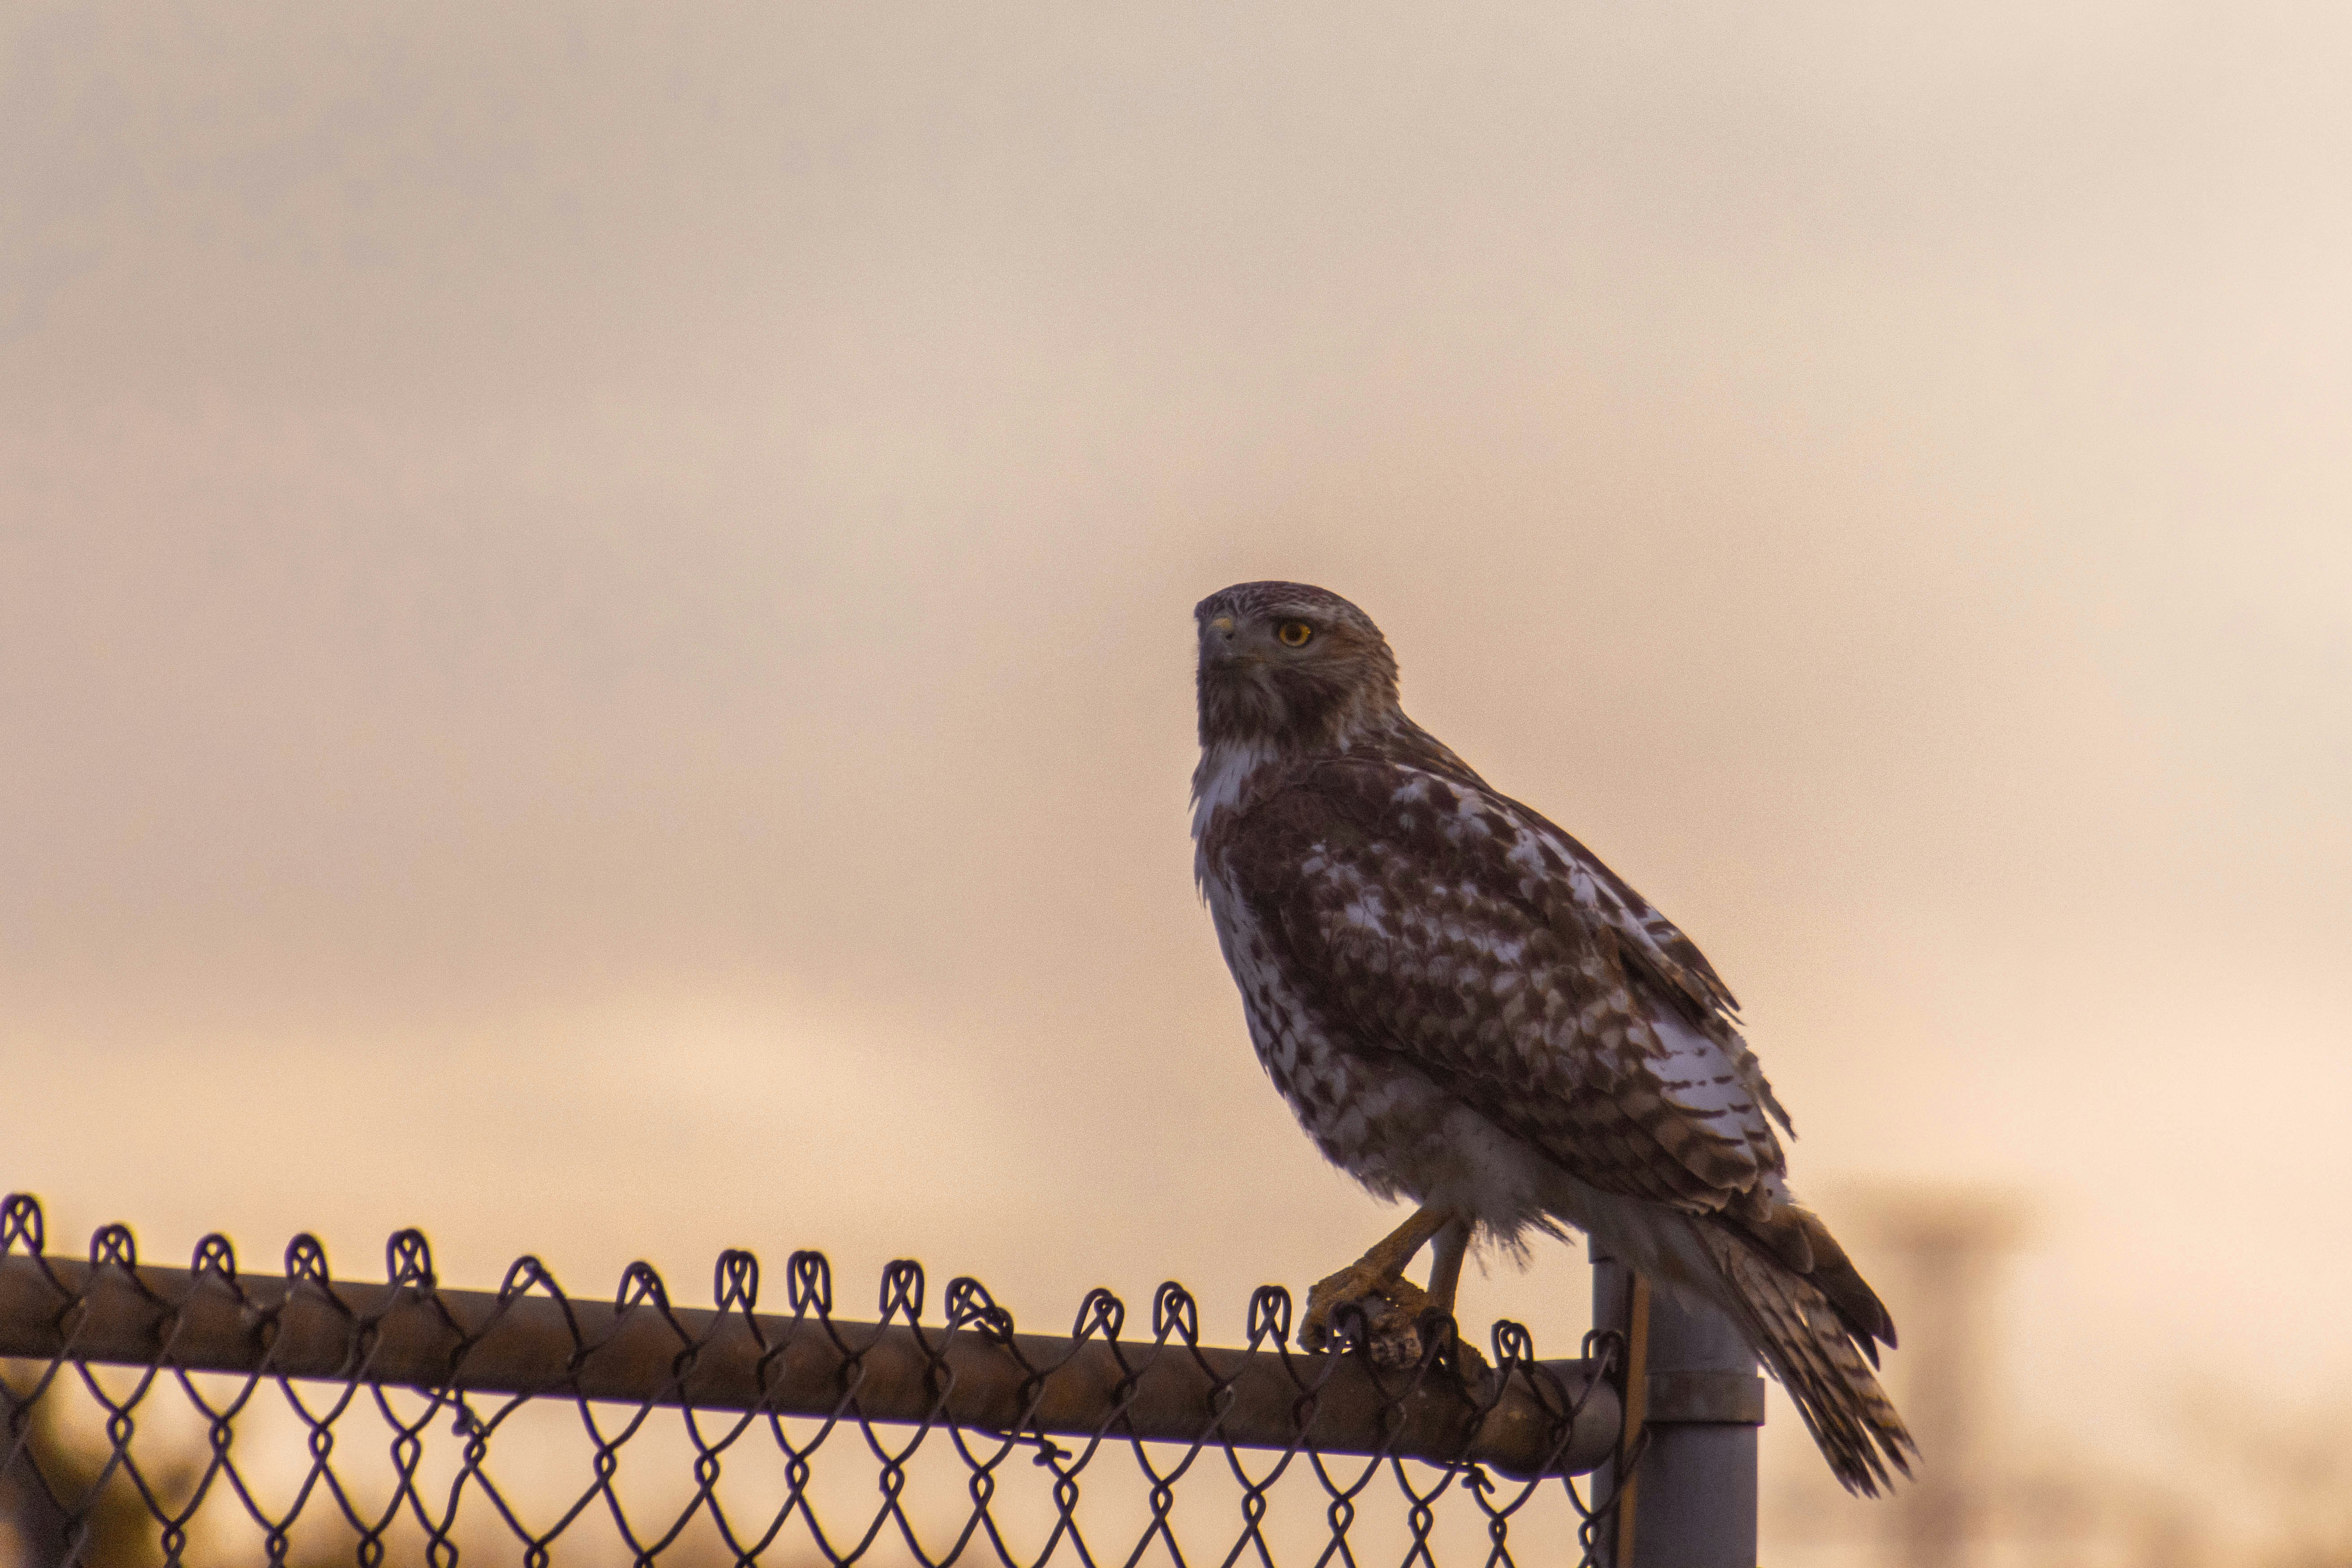 brown and white owl on black metal fence during daytime